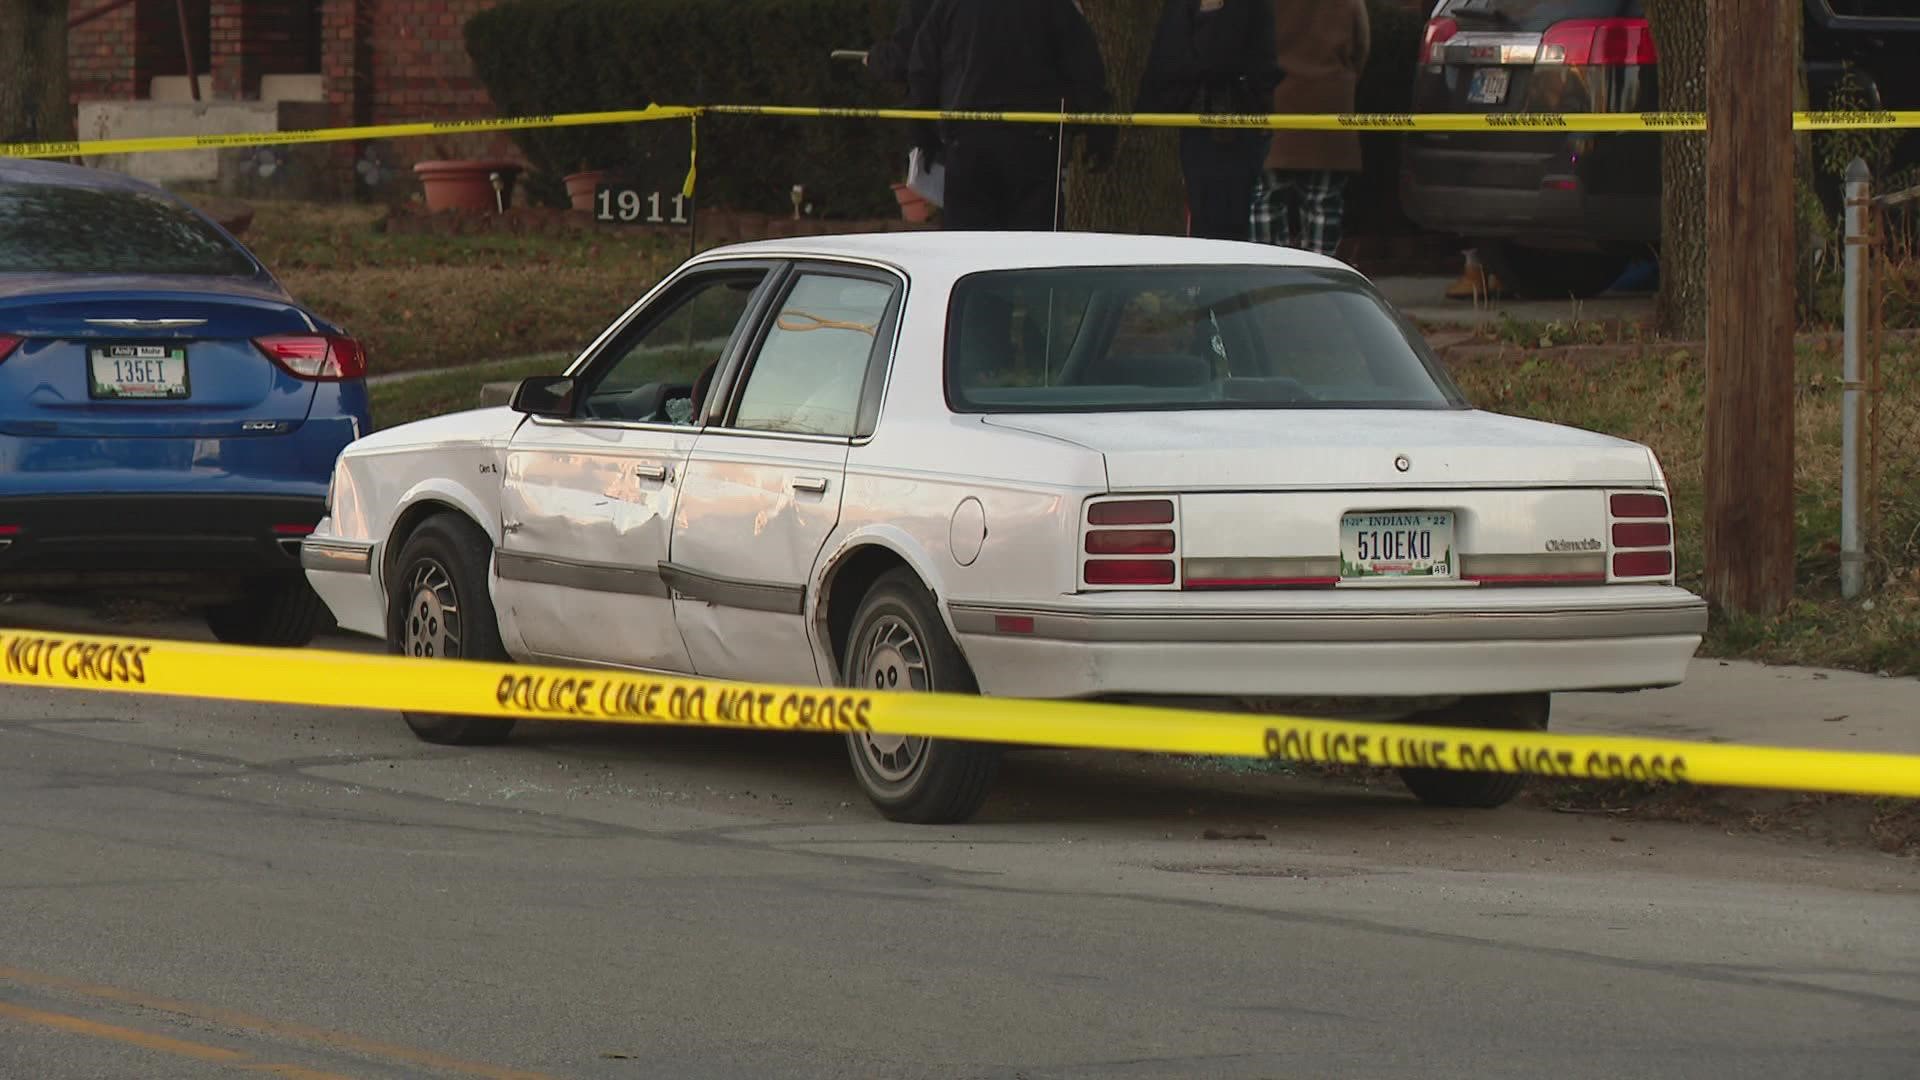 The Marion County Coroner's office identified a man found dead in a car on North Harding Street Sunday.